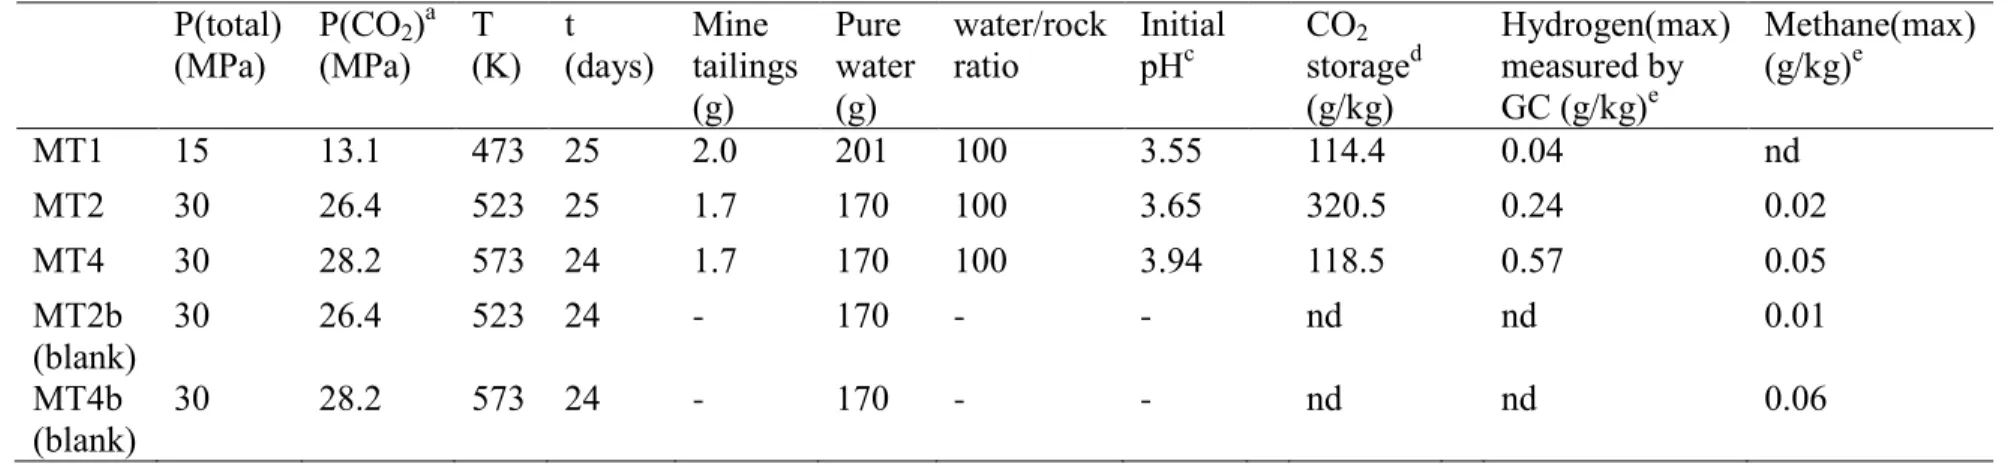 Table 2. Summary of experimental conditions, pH of the solutions, carbonate yields, measured hydrogen and methane in each batch  experiment